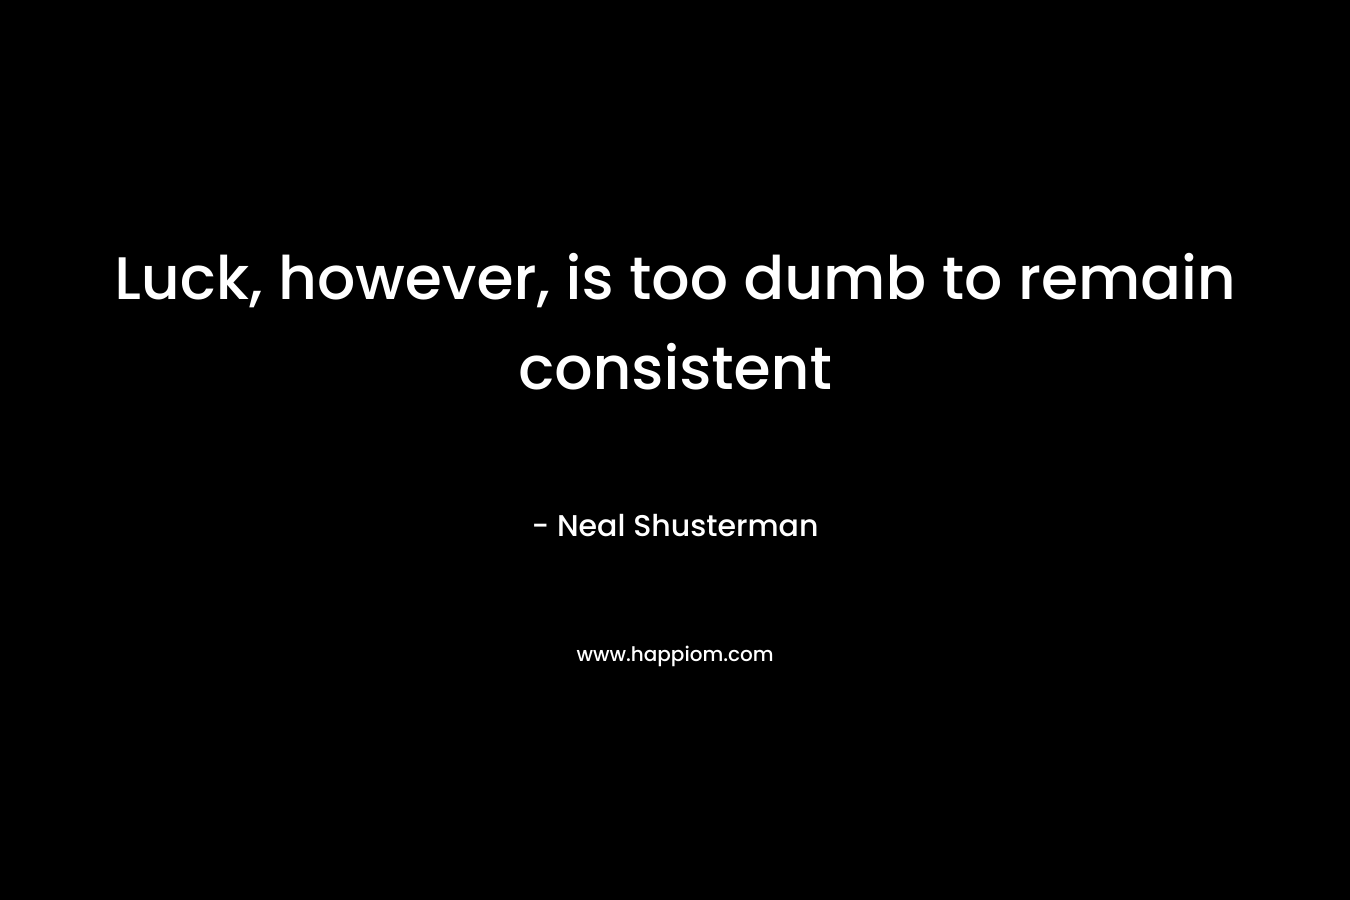 Luck, however, is too dumb to remain consistent – Neal Shusterman